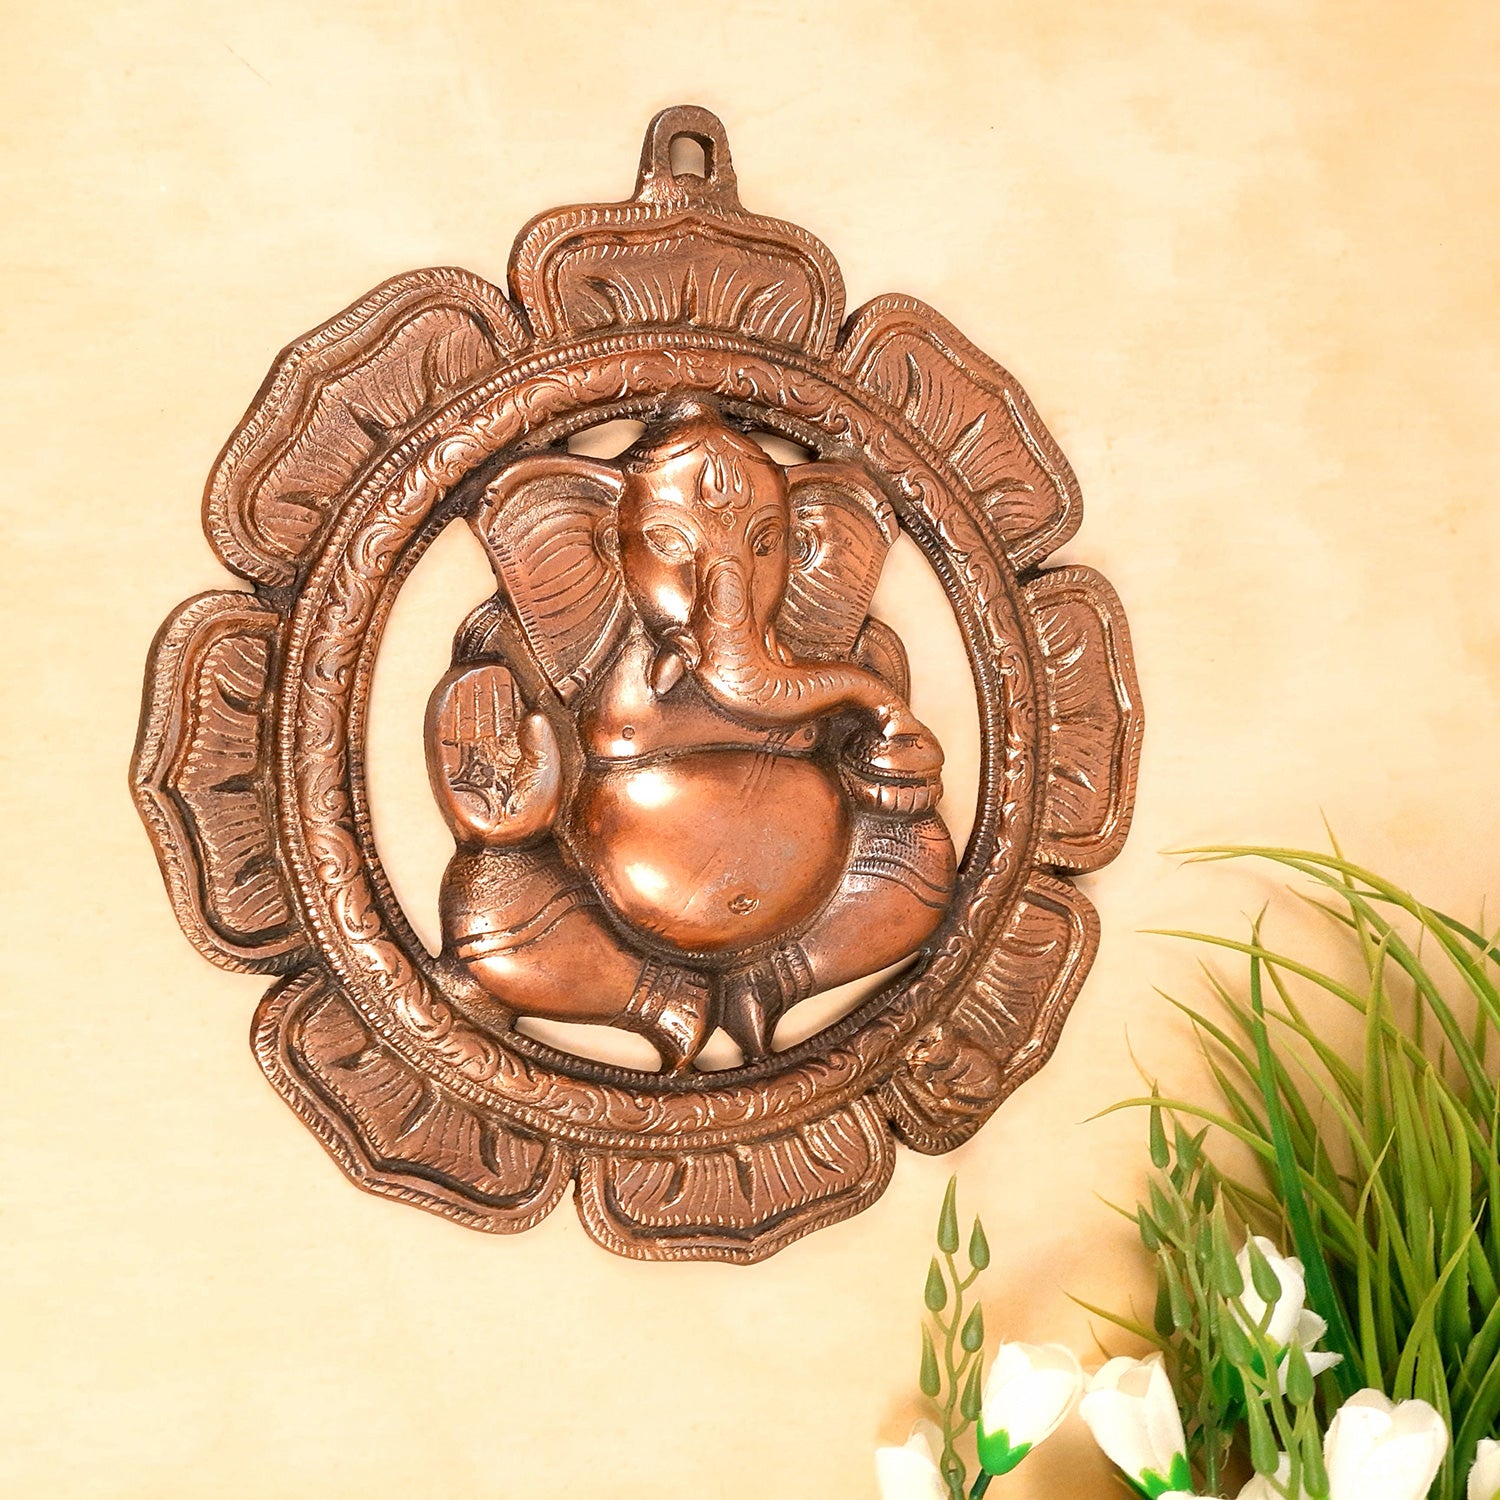 Ganesh Wall Hanging Statue | Lord Ganesha Wall Art - for Home, Puja, Living Room & Office | Antique Idol for Religious & Spiritual Decor - 12 Inch - apkamart